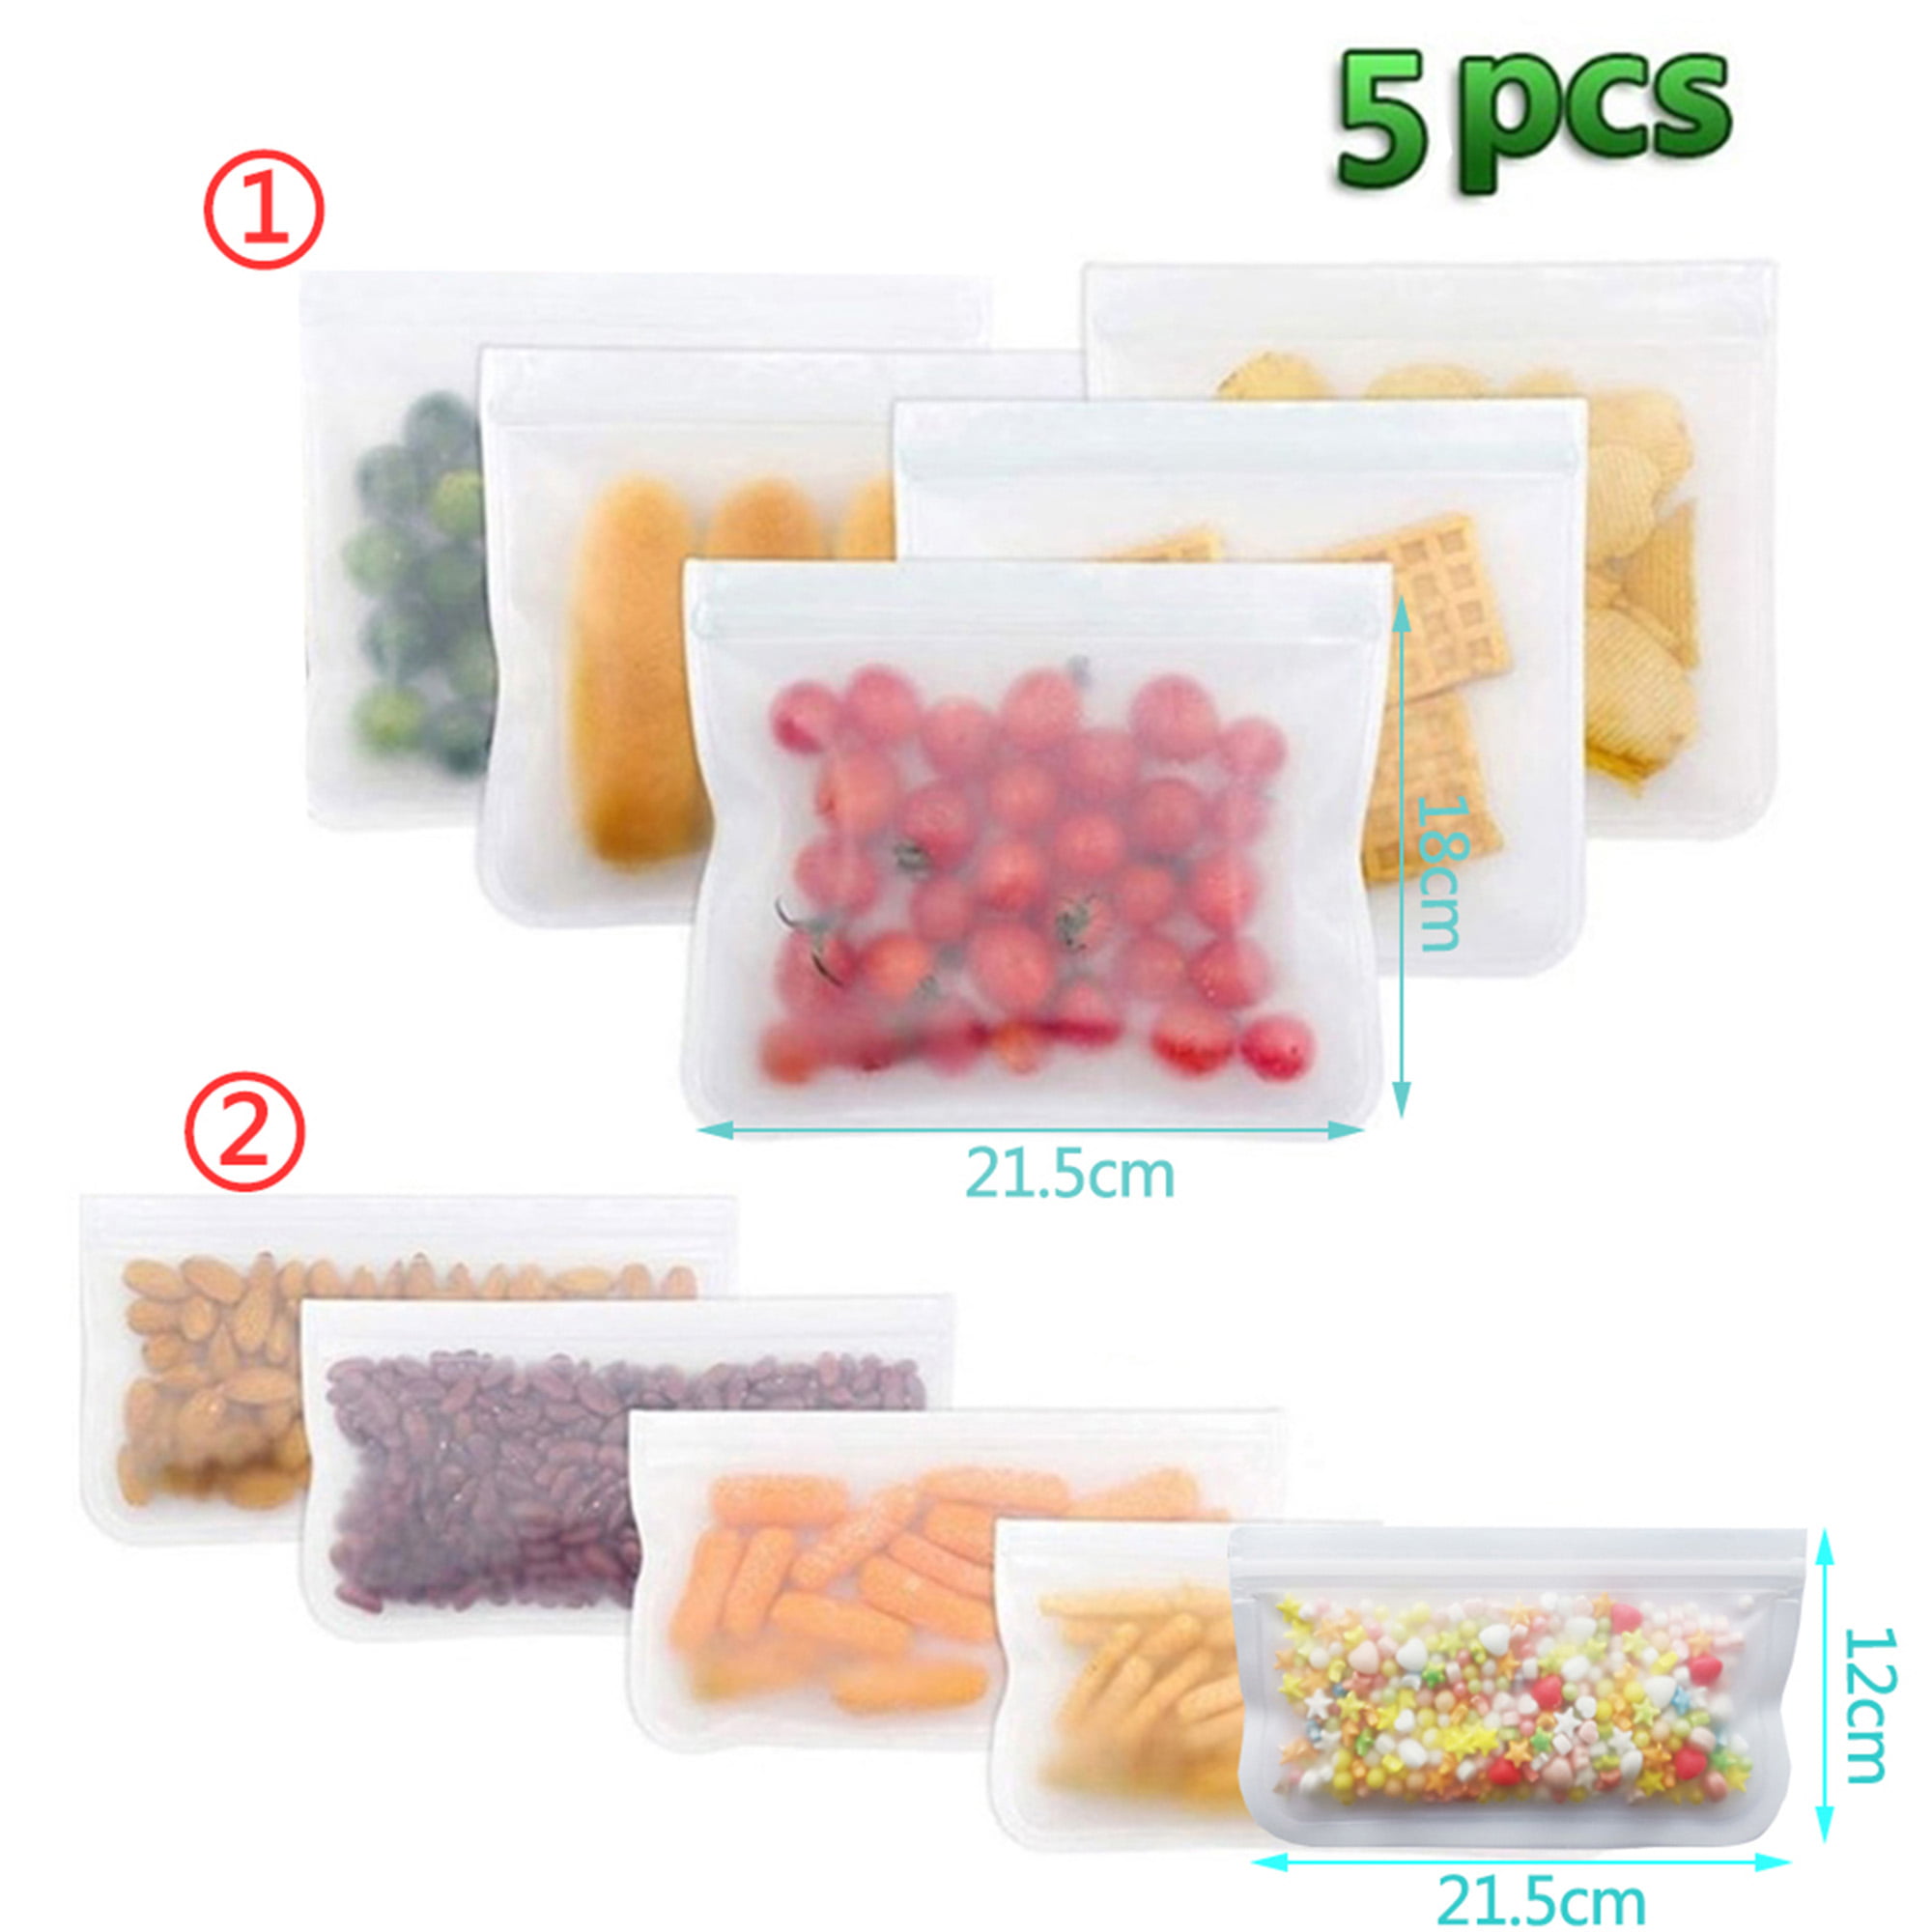 Food Storage Bags Details about   Korlon 12 Pack Reusable Silicone Bags 5 Sandwich Bags, 5 Sna 